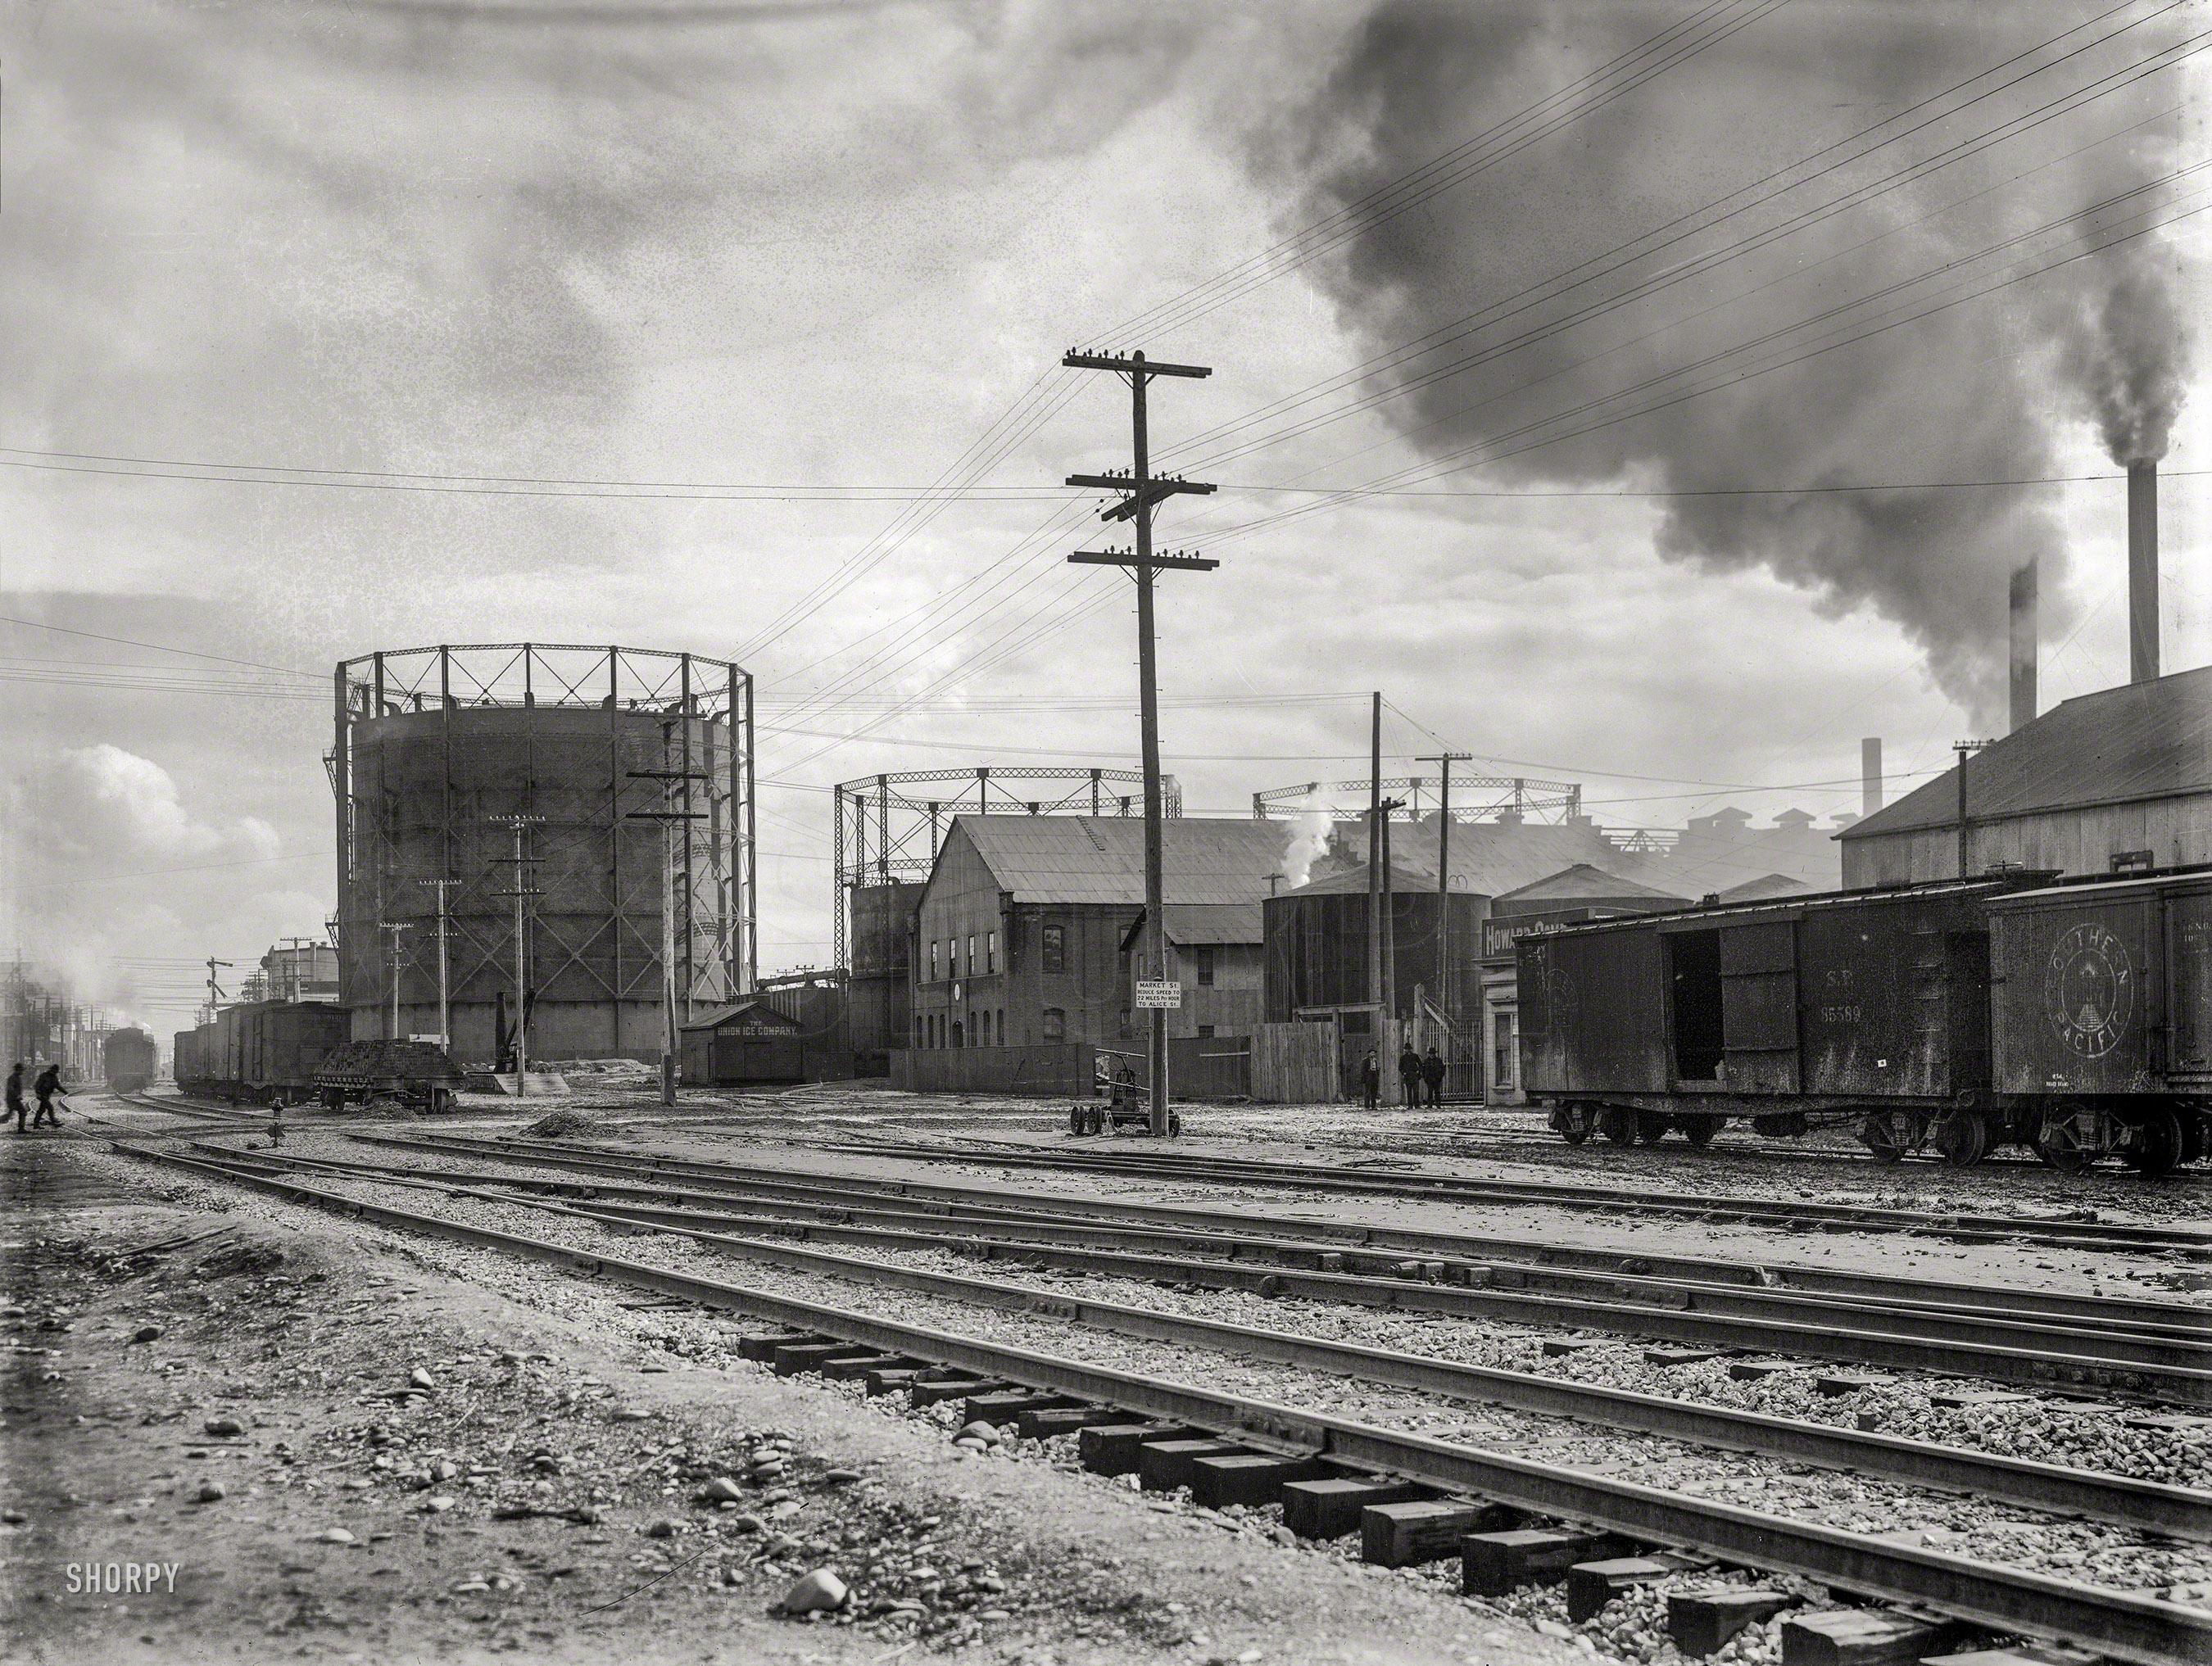 Circa 1910. "Gasometers and rail yard at Oakland, California." 8x6 inch glass negative by the Cheney Photo Advertising Co. View full size.